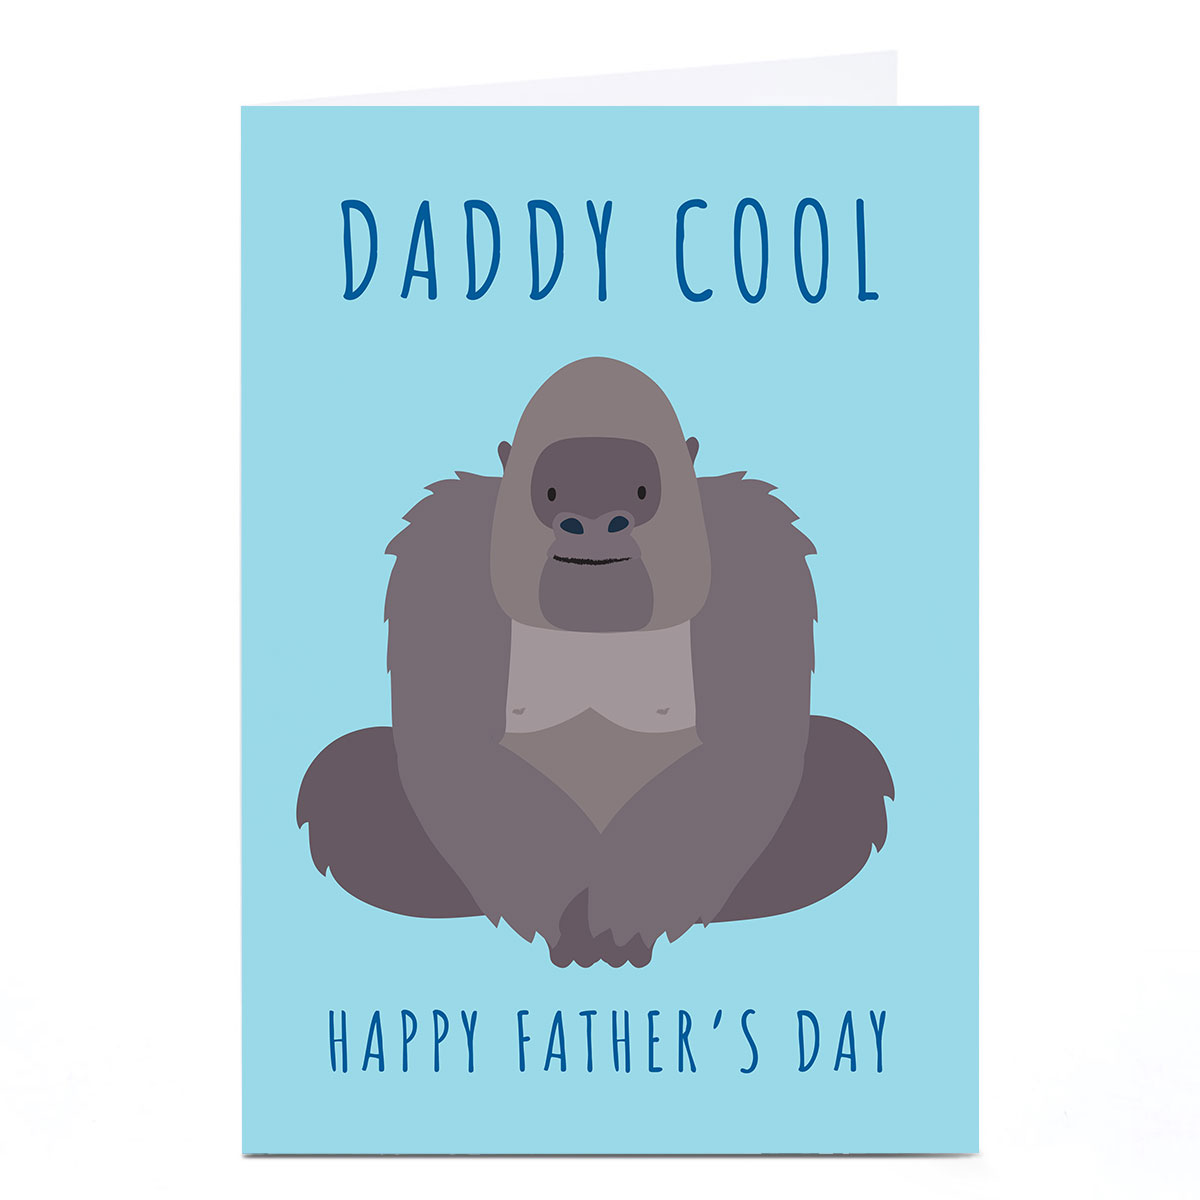 Personalised Klara Hawkins Father's Day Card - Daddy Cool